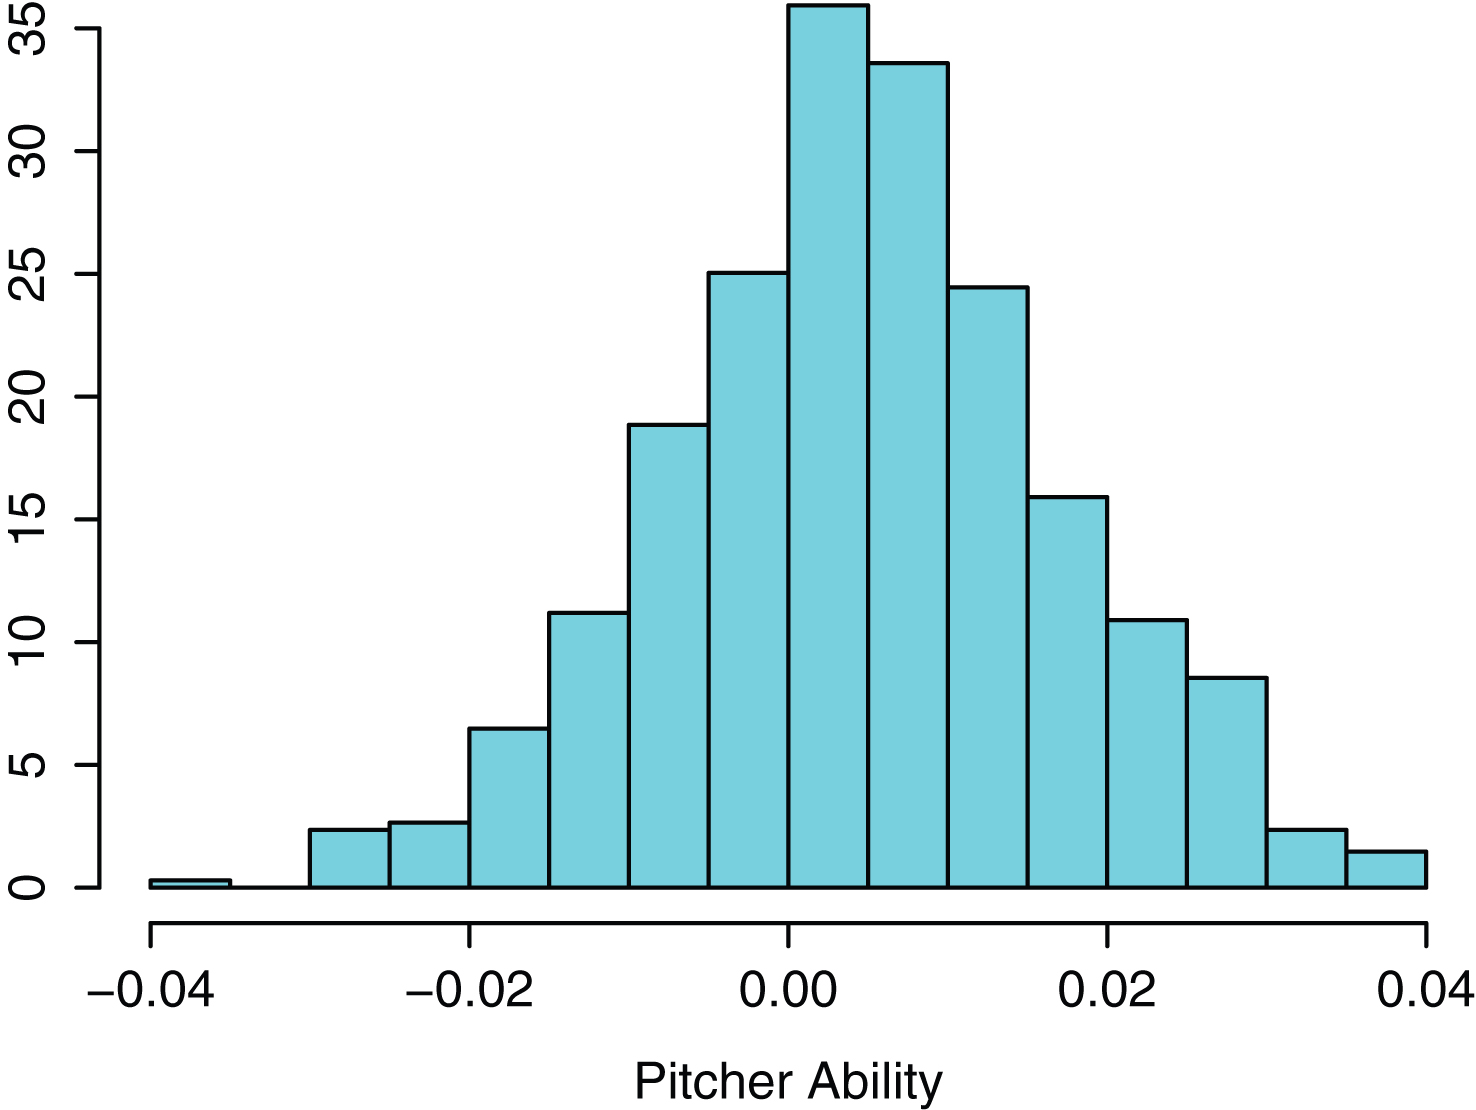 Histogram of abilities of all pitchers in 2013 season.